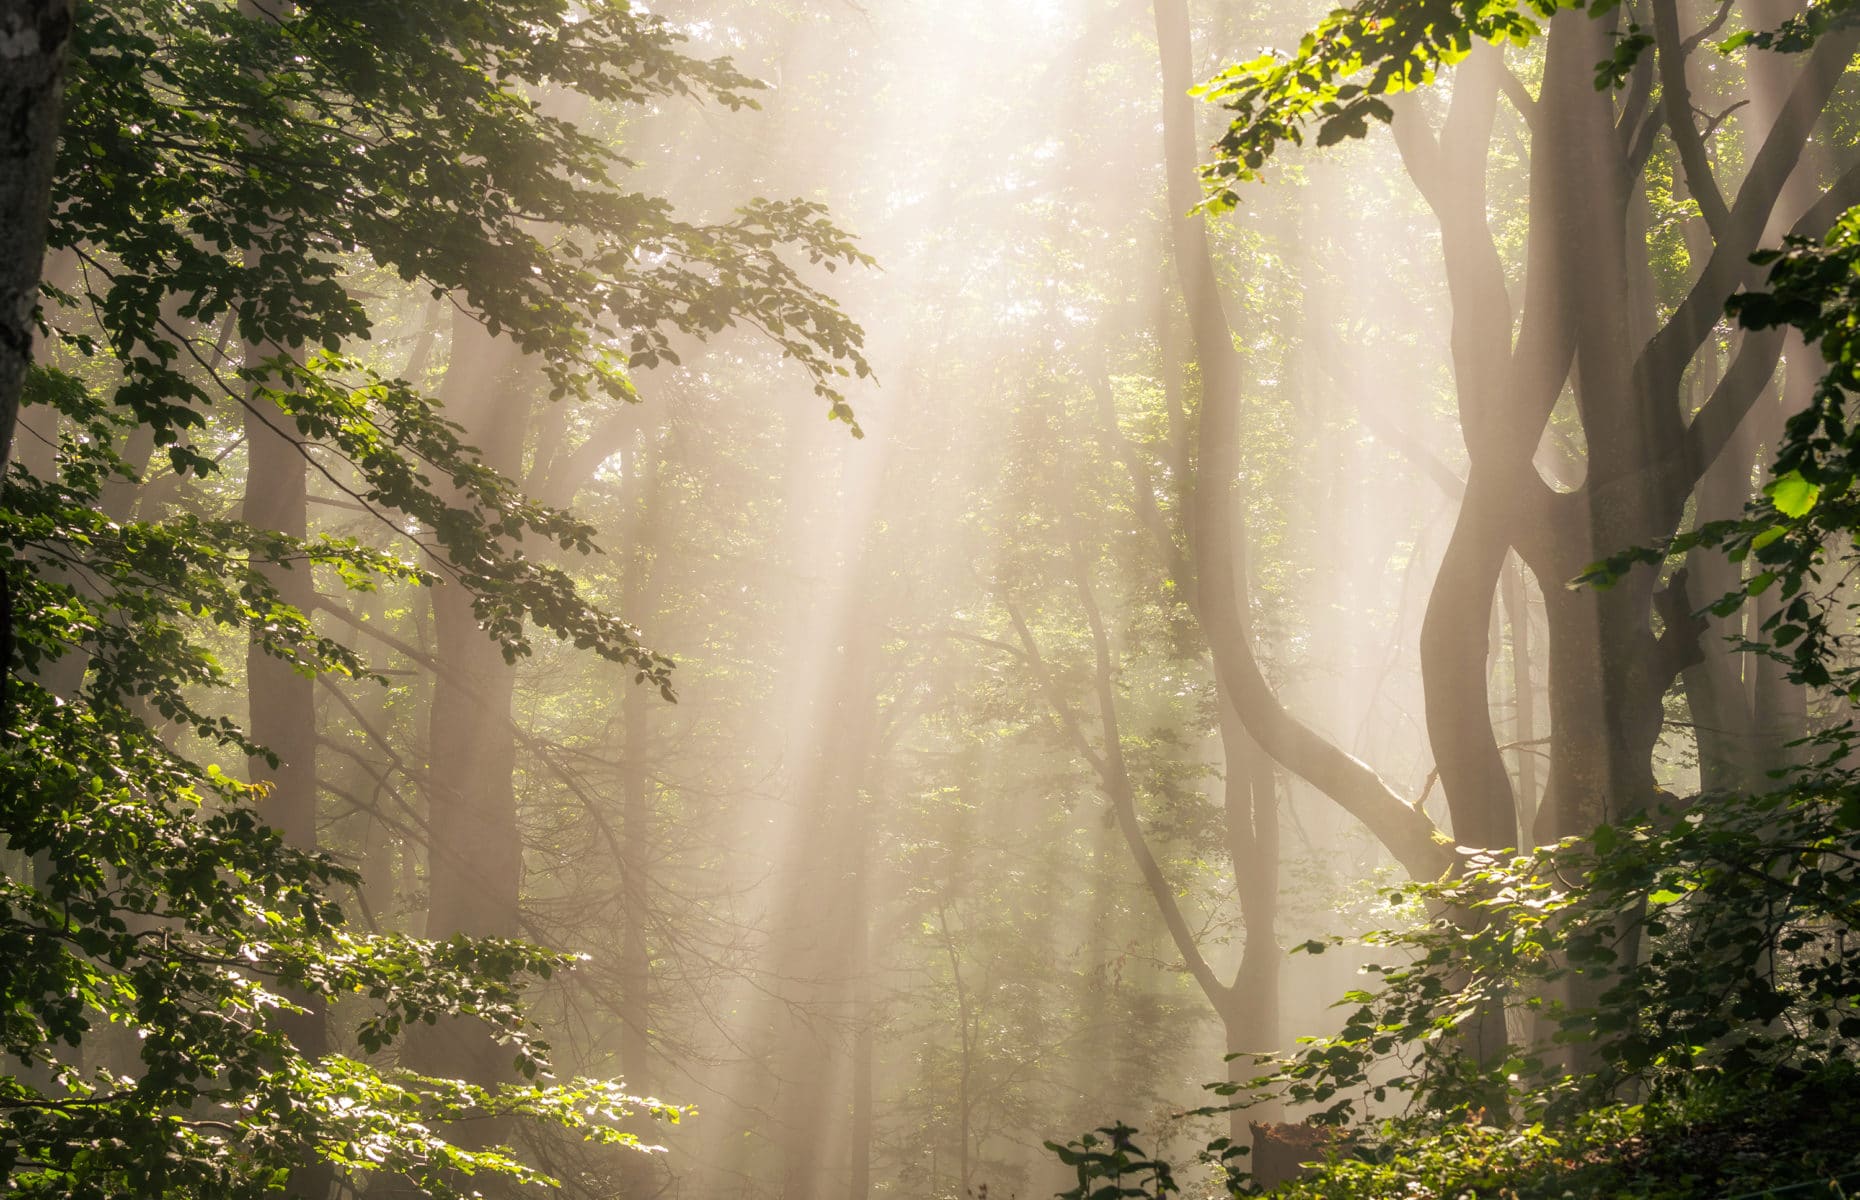 Morning sun rays in forest